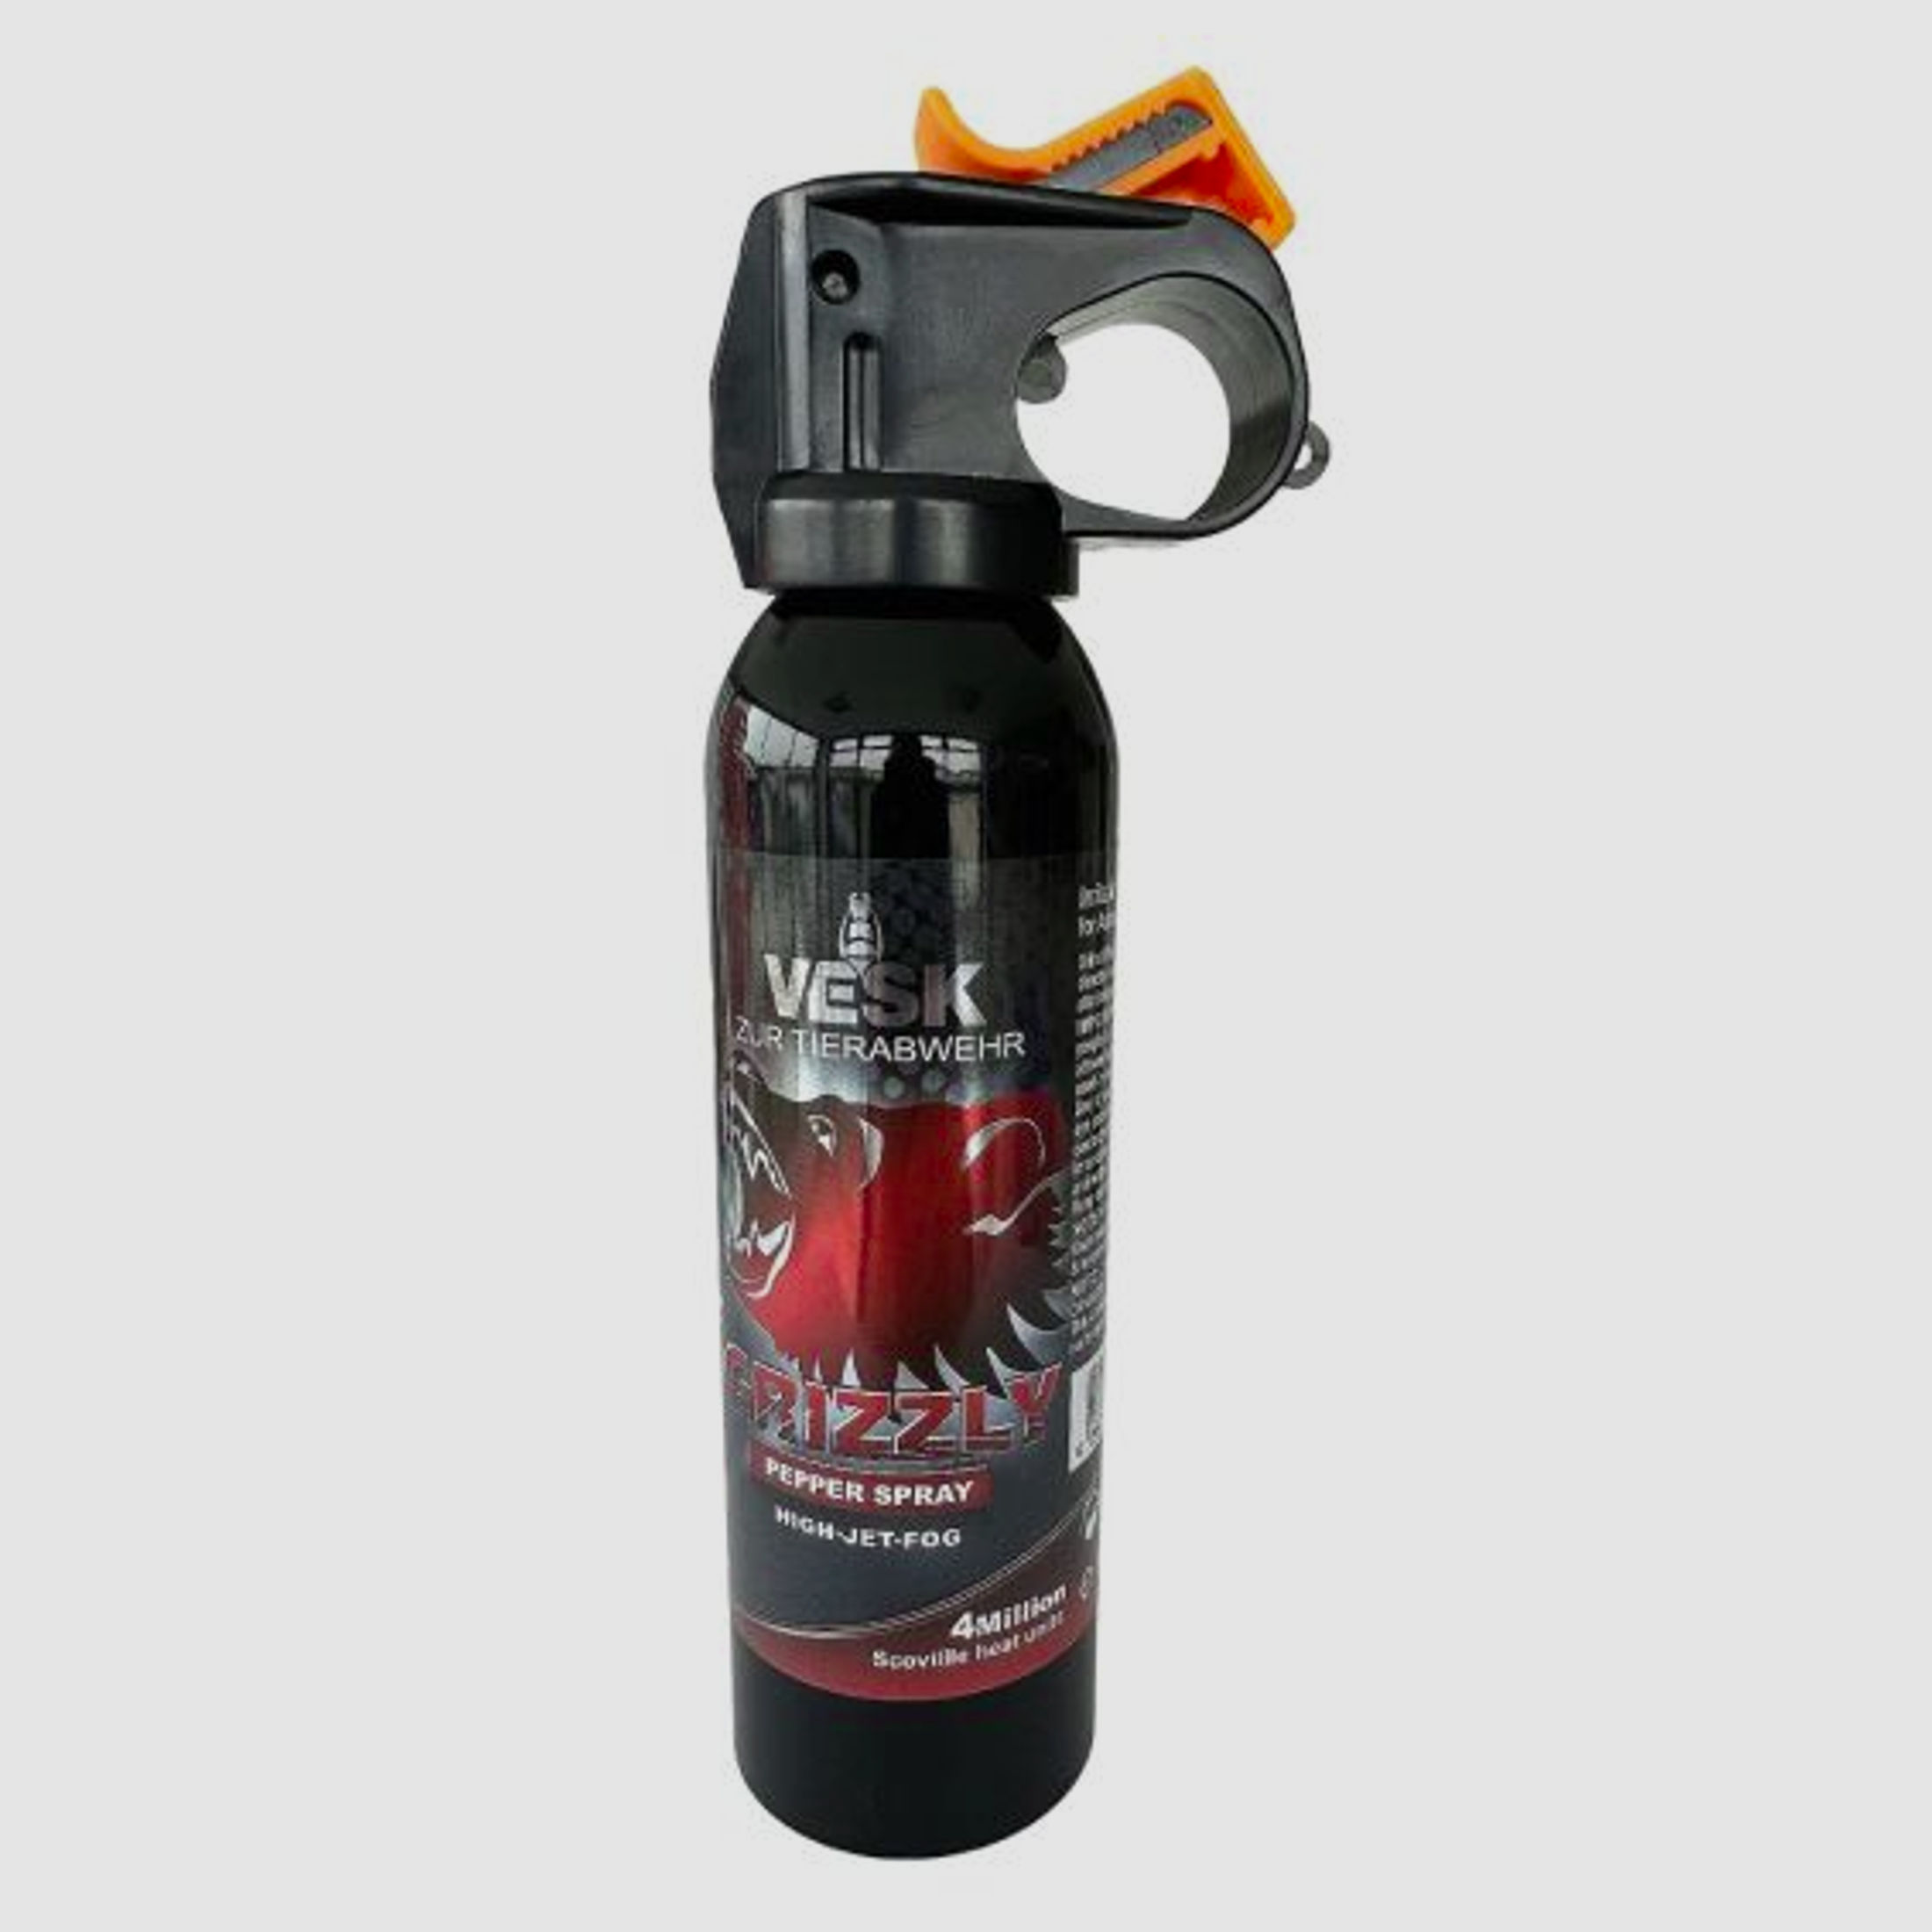 GRIZZLY Pfefferspray 200 ml – EXTRA STRONG